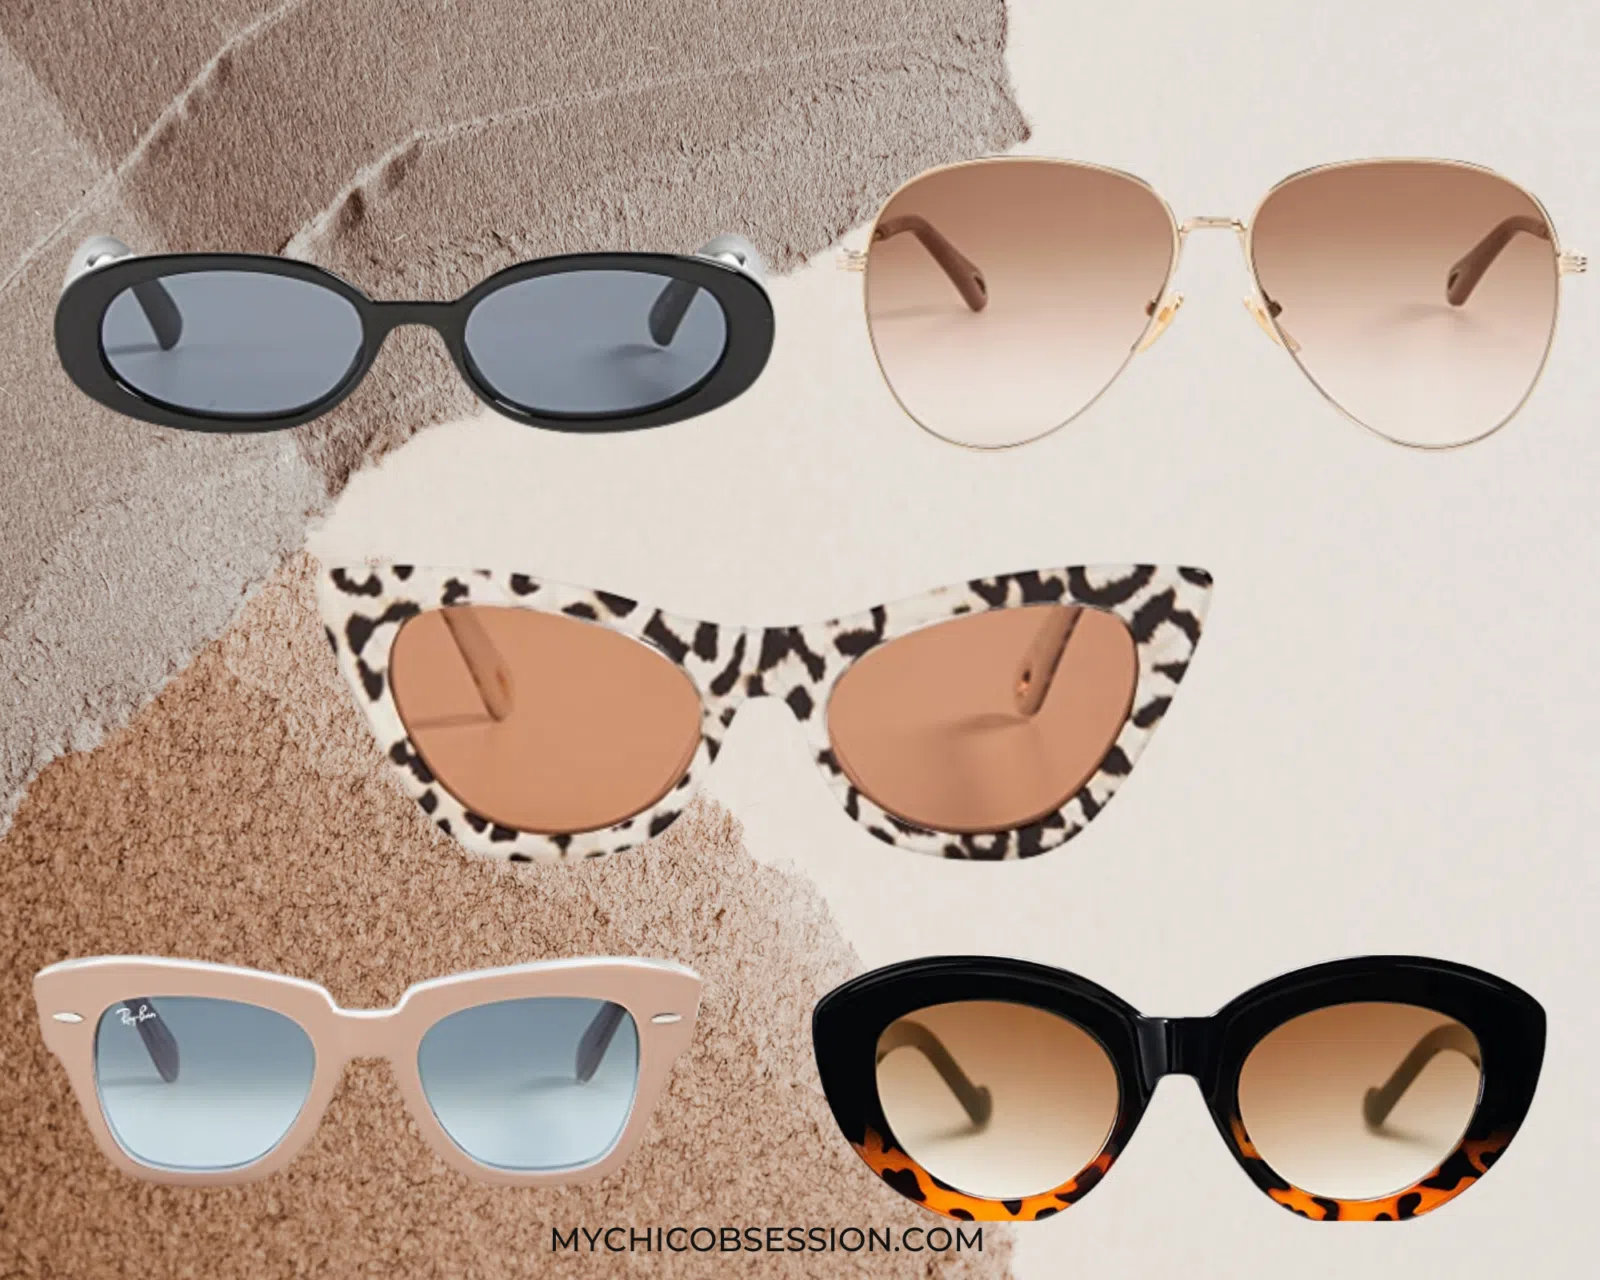 Sunglasses that are in style